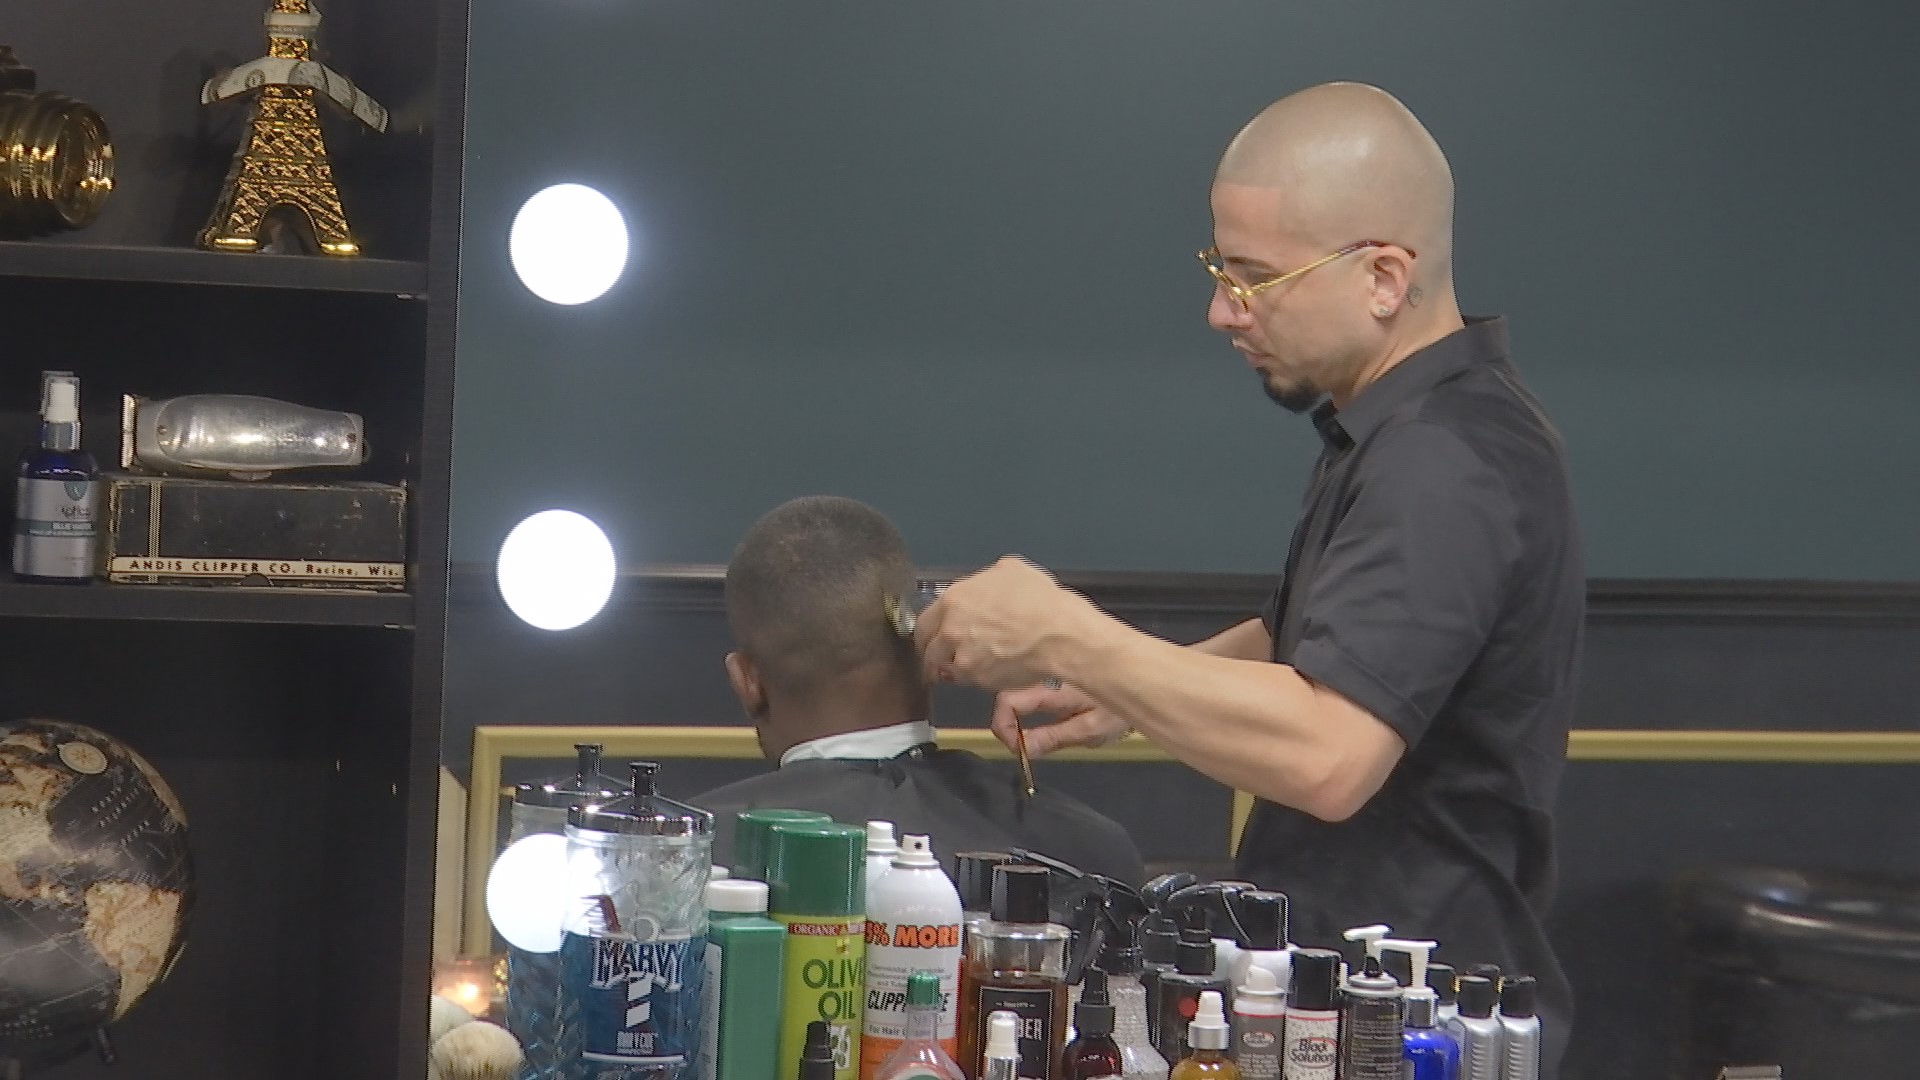 Ivan Suarez as he cuts the hair of a patron at his barber shop. (Credit: WINK News)